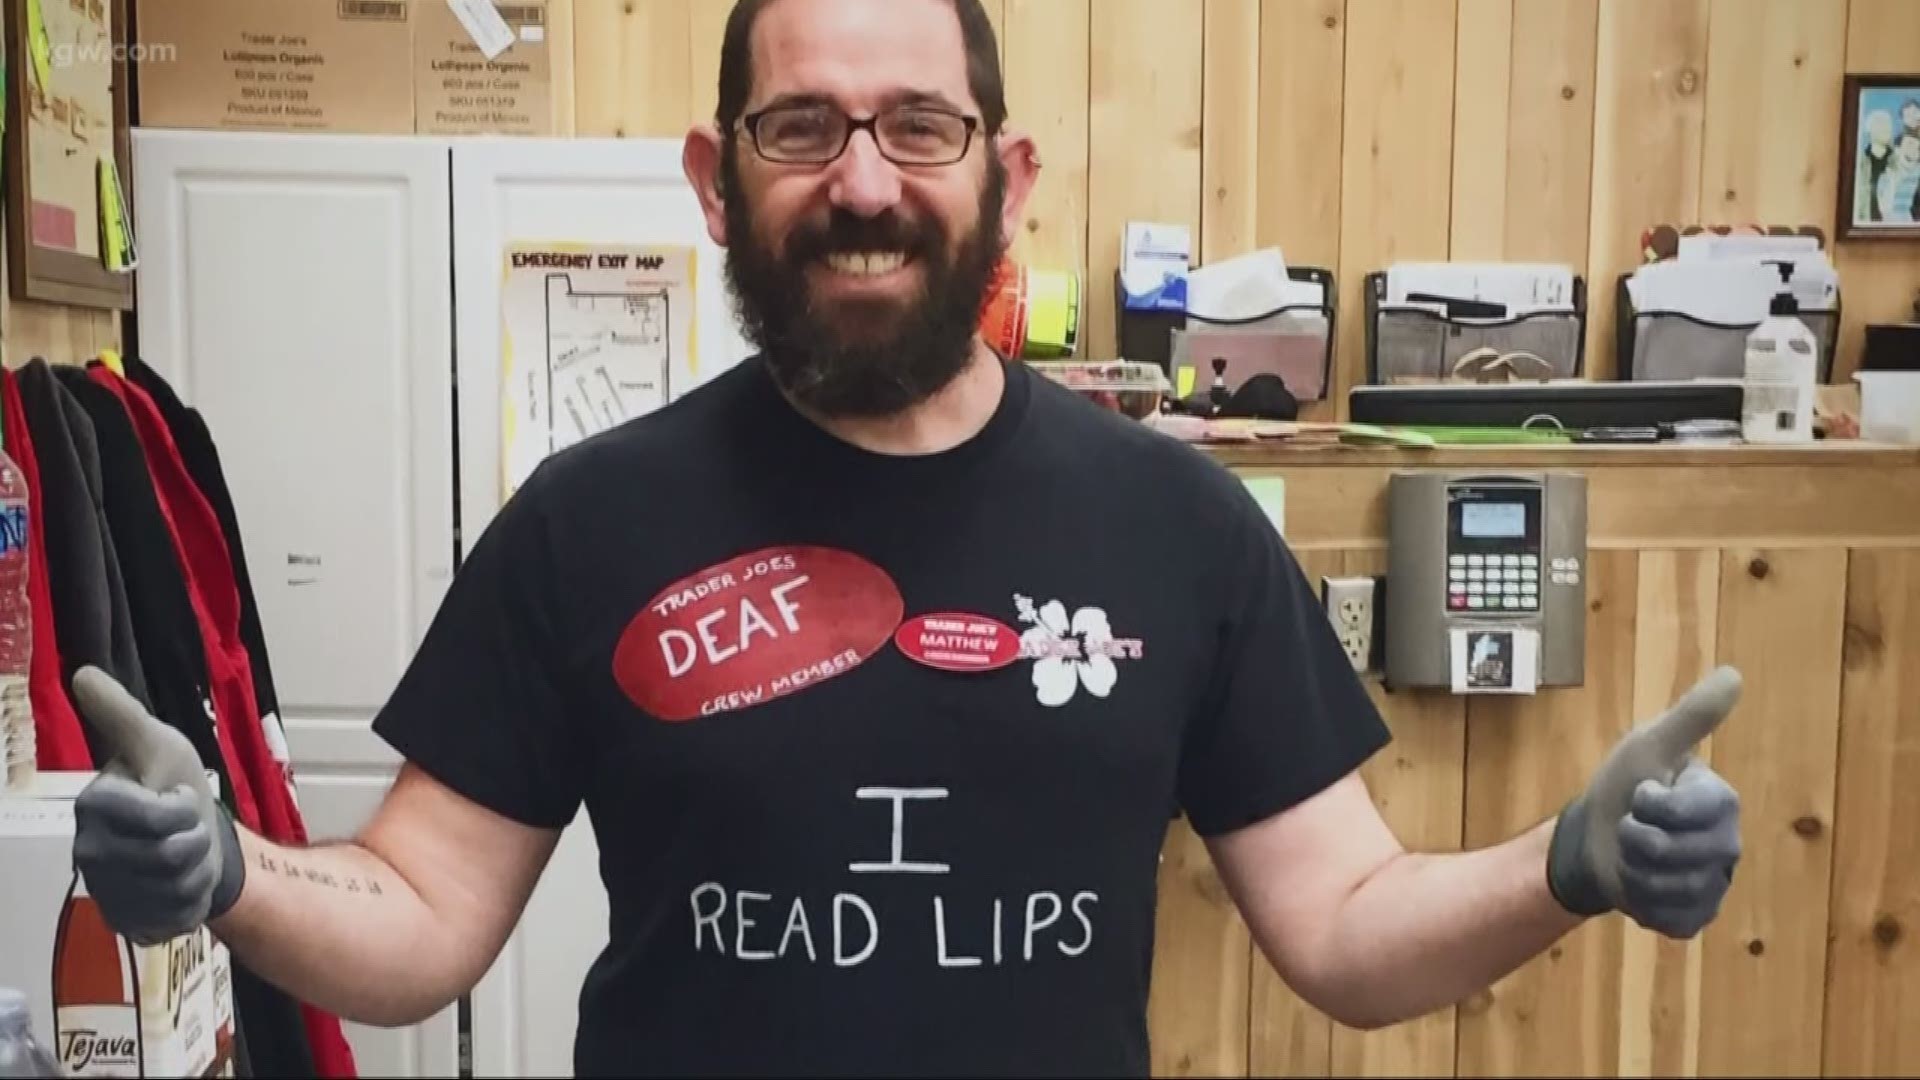 Matthew Simmons reads customers' lips if they don't know sign language. Protective masks created an unexpected communication barrier between them.